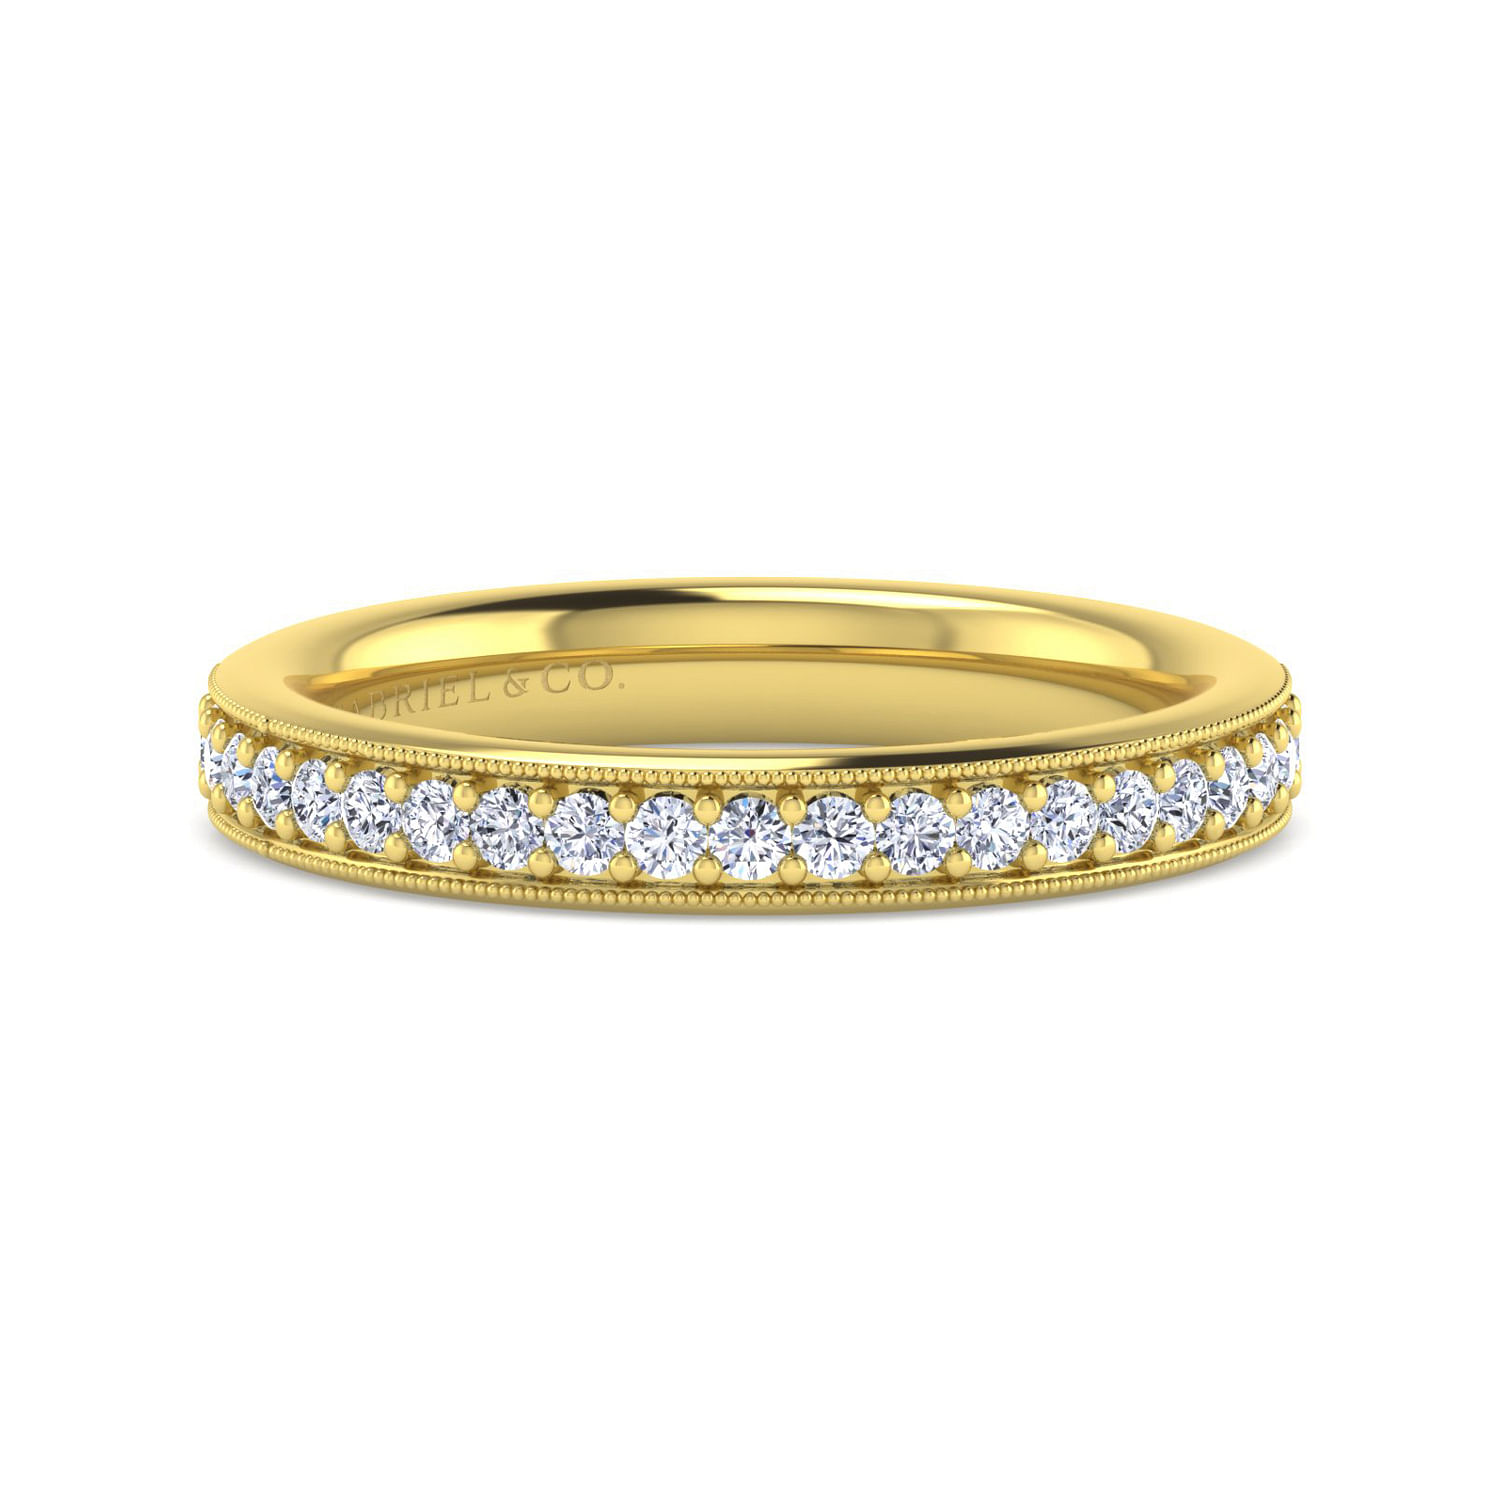 14K Yellow Gold Channel Prong Diamond Anniversary Band with Milgrain